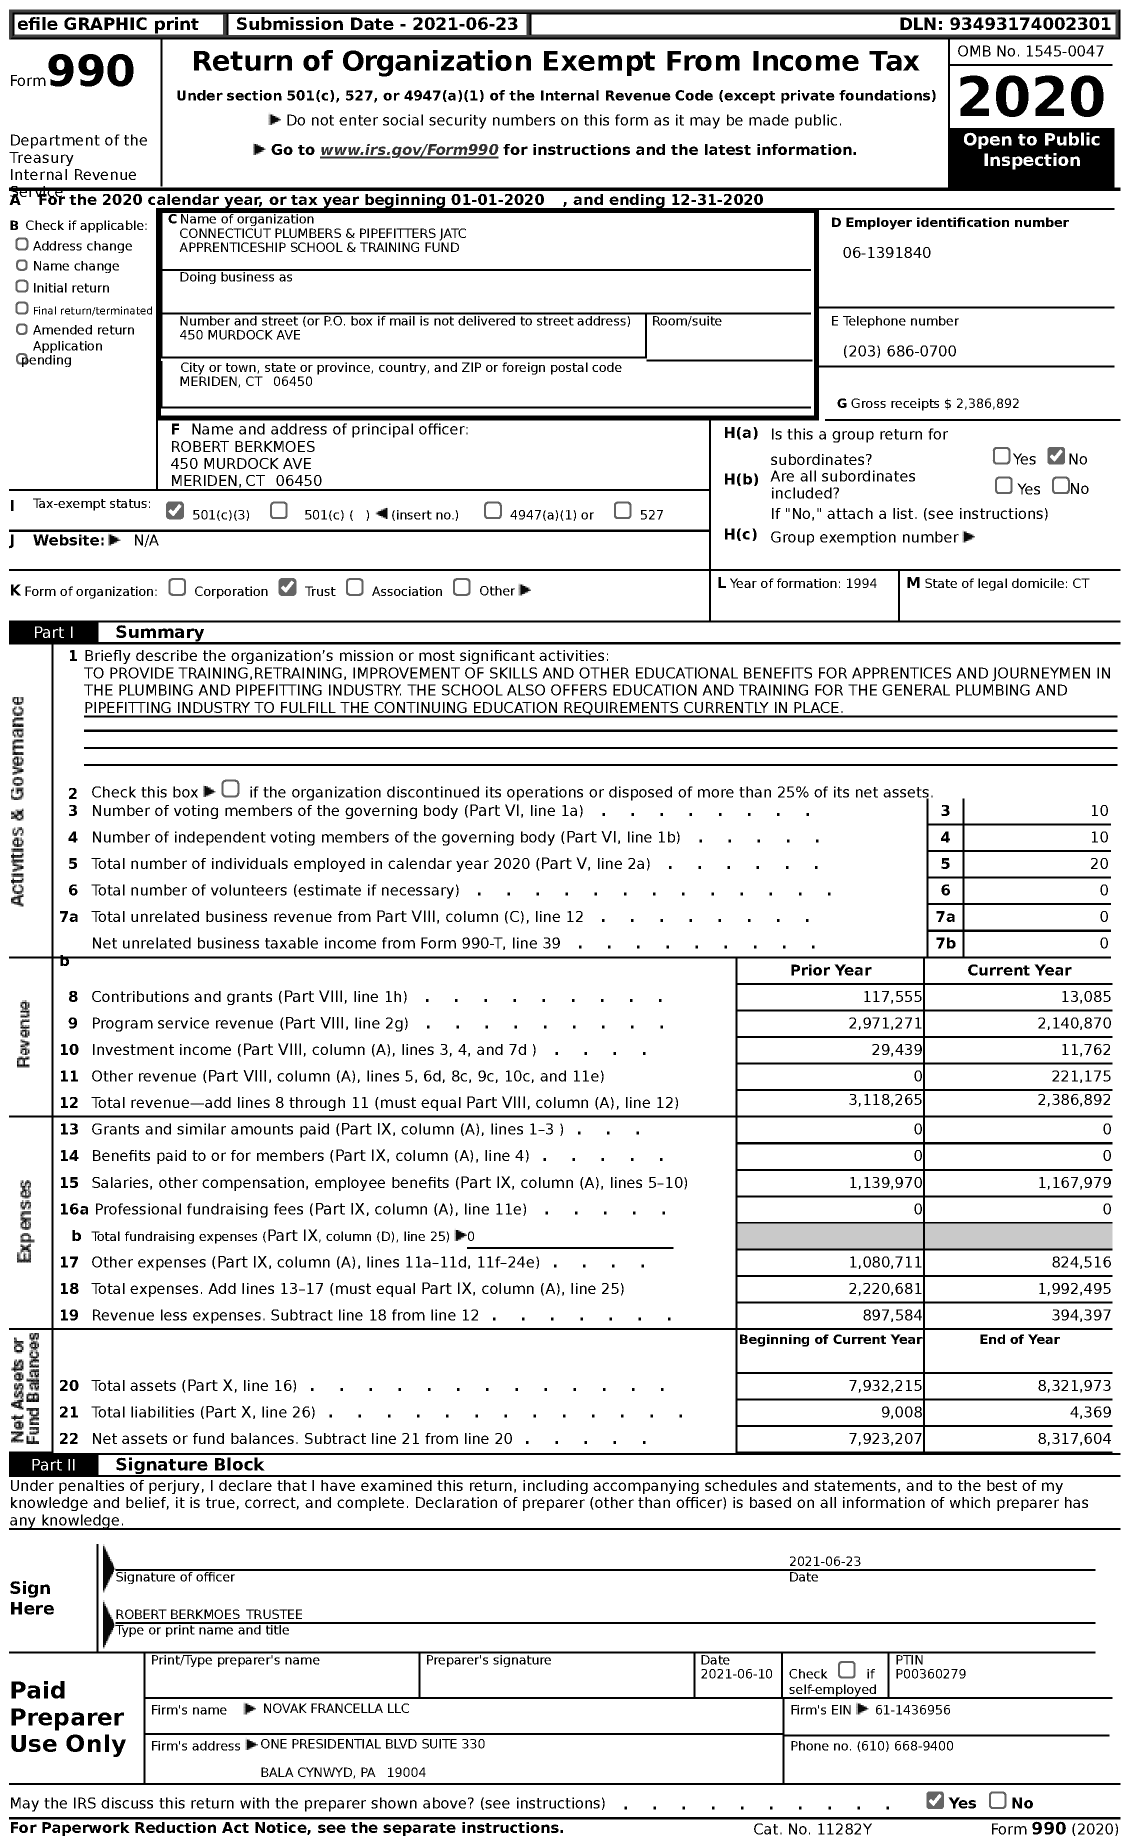 Image of first page of 2020 Form 990 for Connecticut Plumbers and Pipefitters Jatc Apprenticeship School and Training Fund